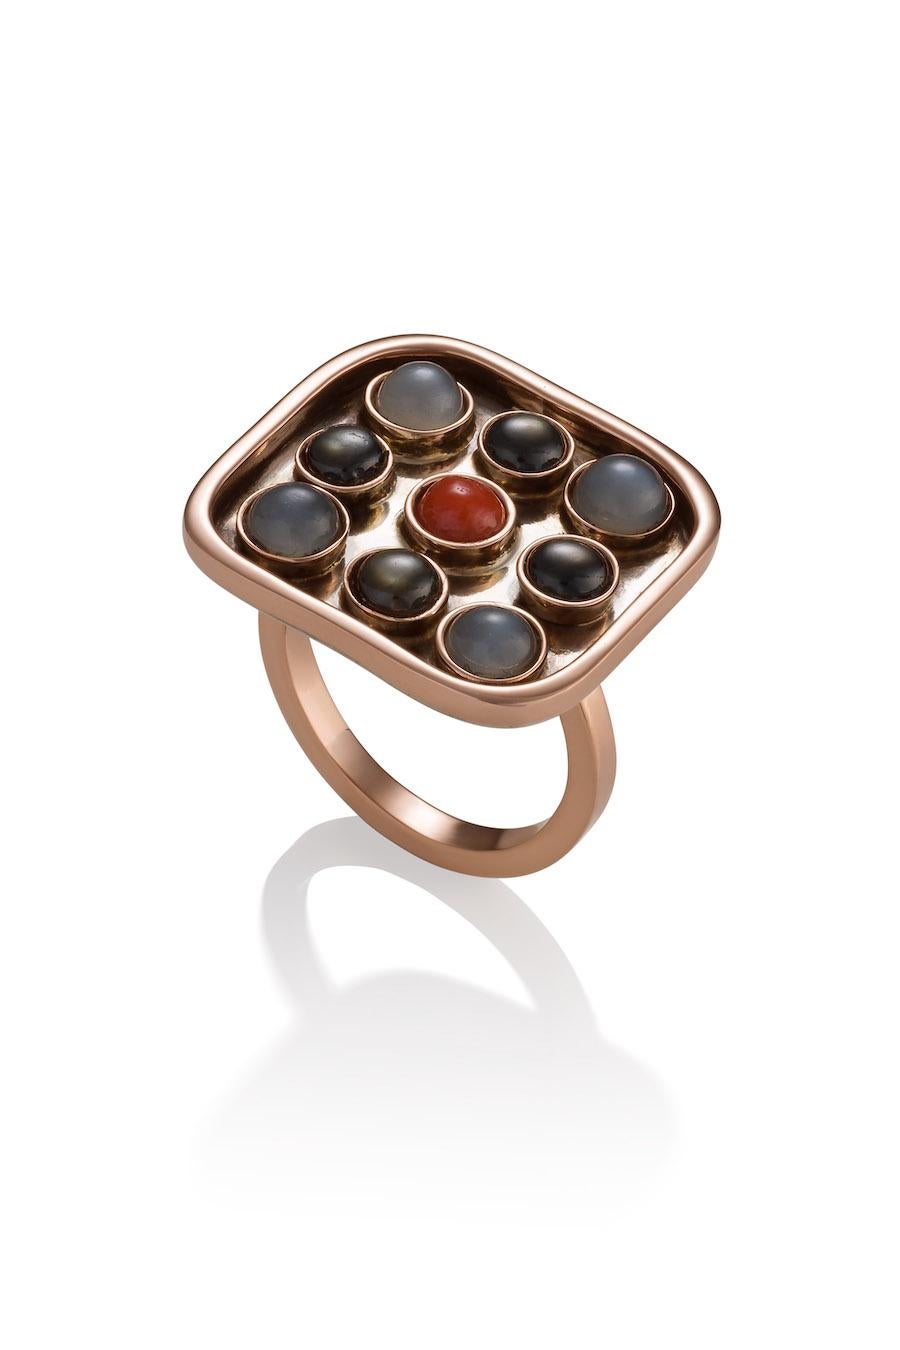 14K/10K, Sterling Silver, Black Star Sapphires, Gray Moonstones, and repurposed vintage Coral cabochon set in 14K Rose gold bezels on an oxidized silver platform surrounded by a 10K Rose gold band resting on a  2.5mm wide 10K Rose gold band.
This